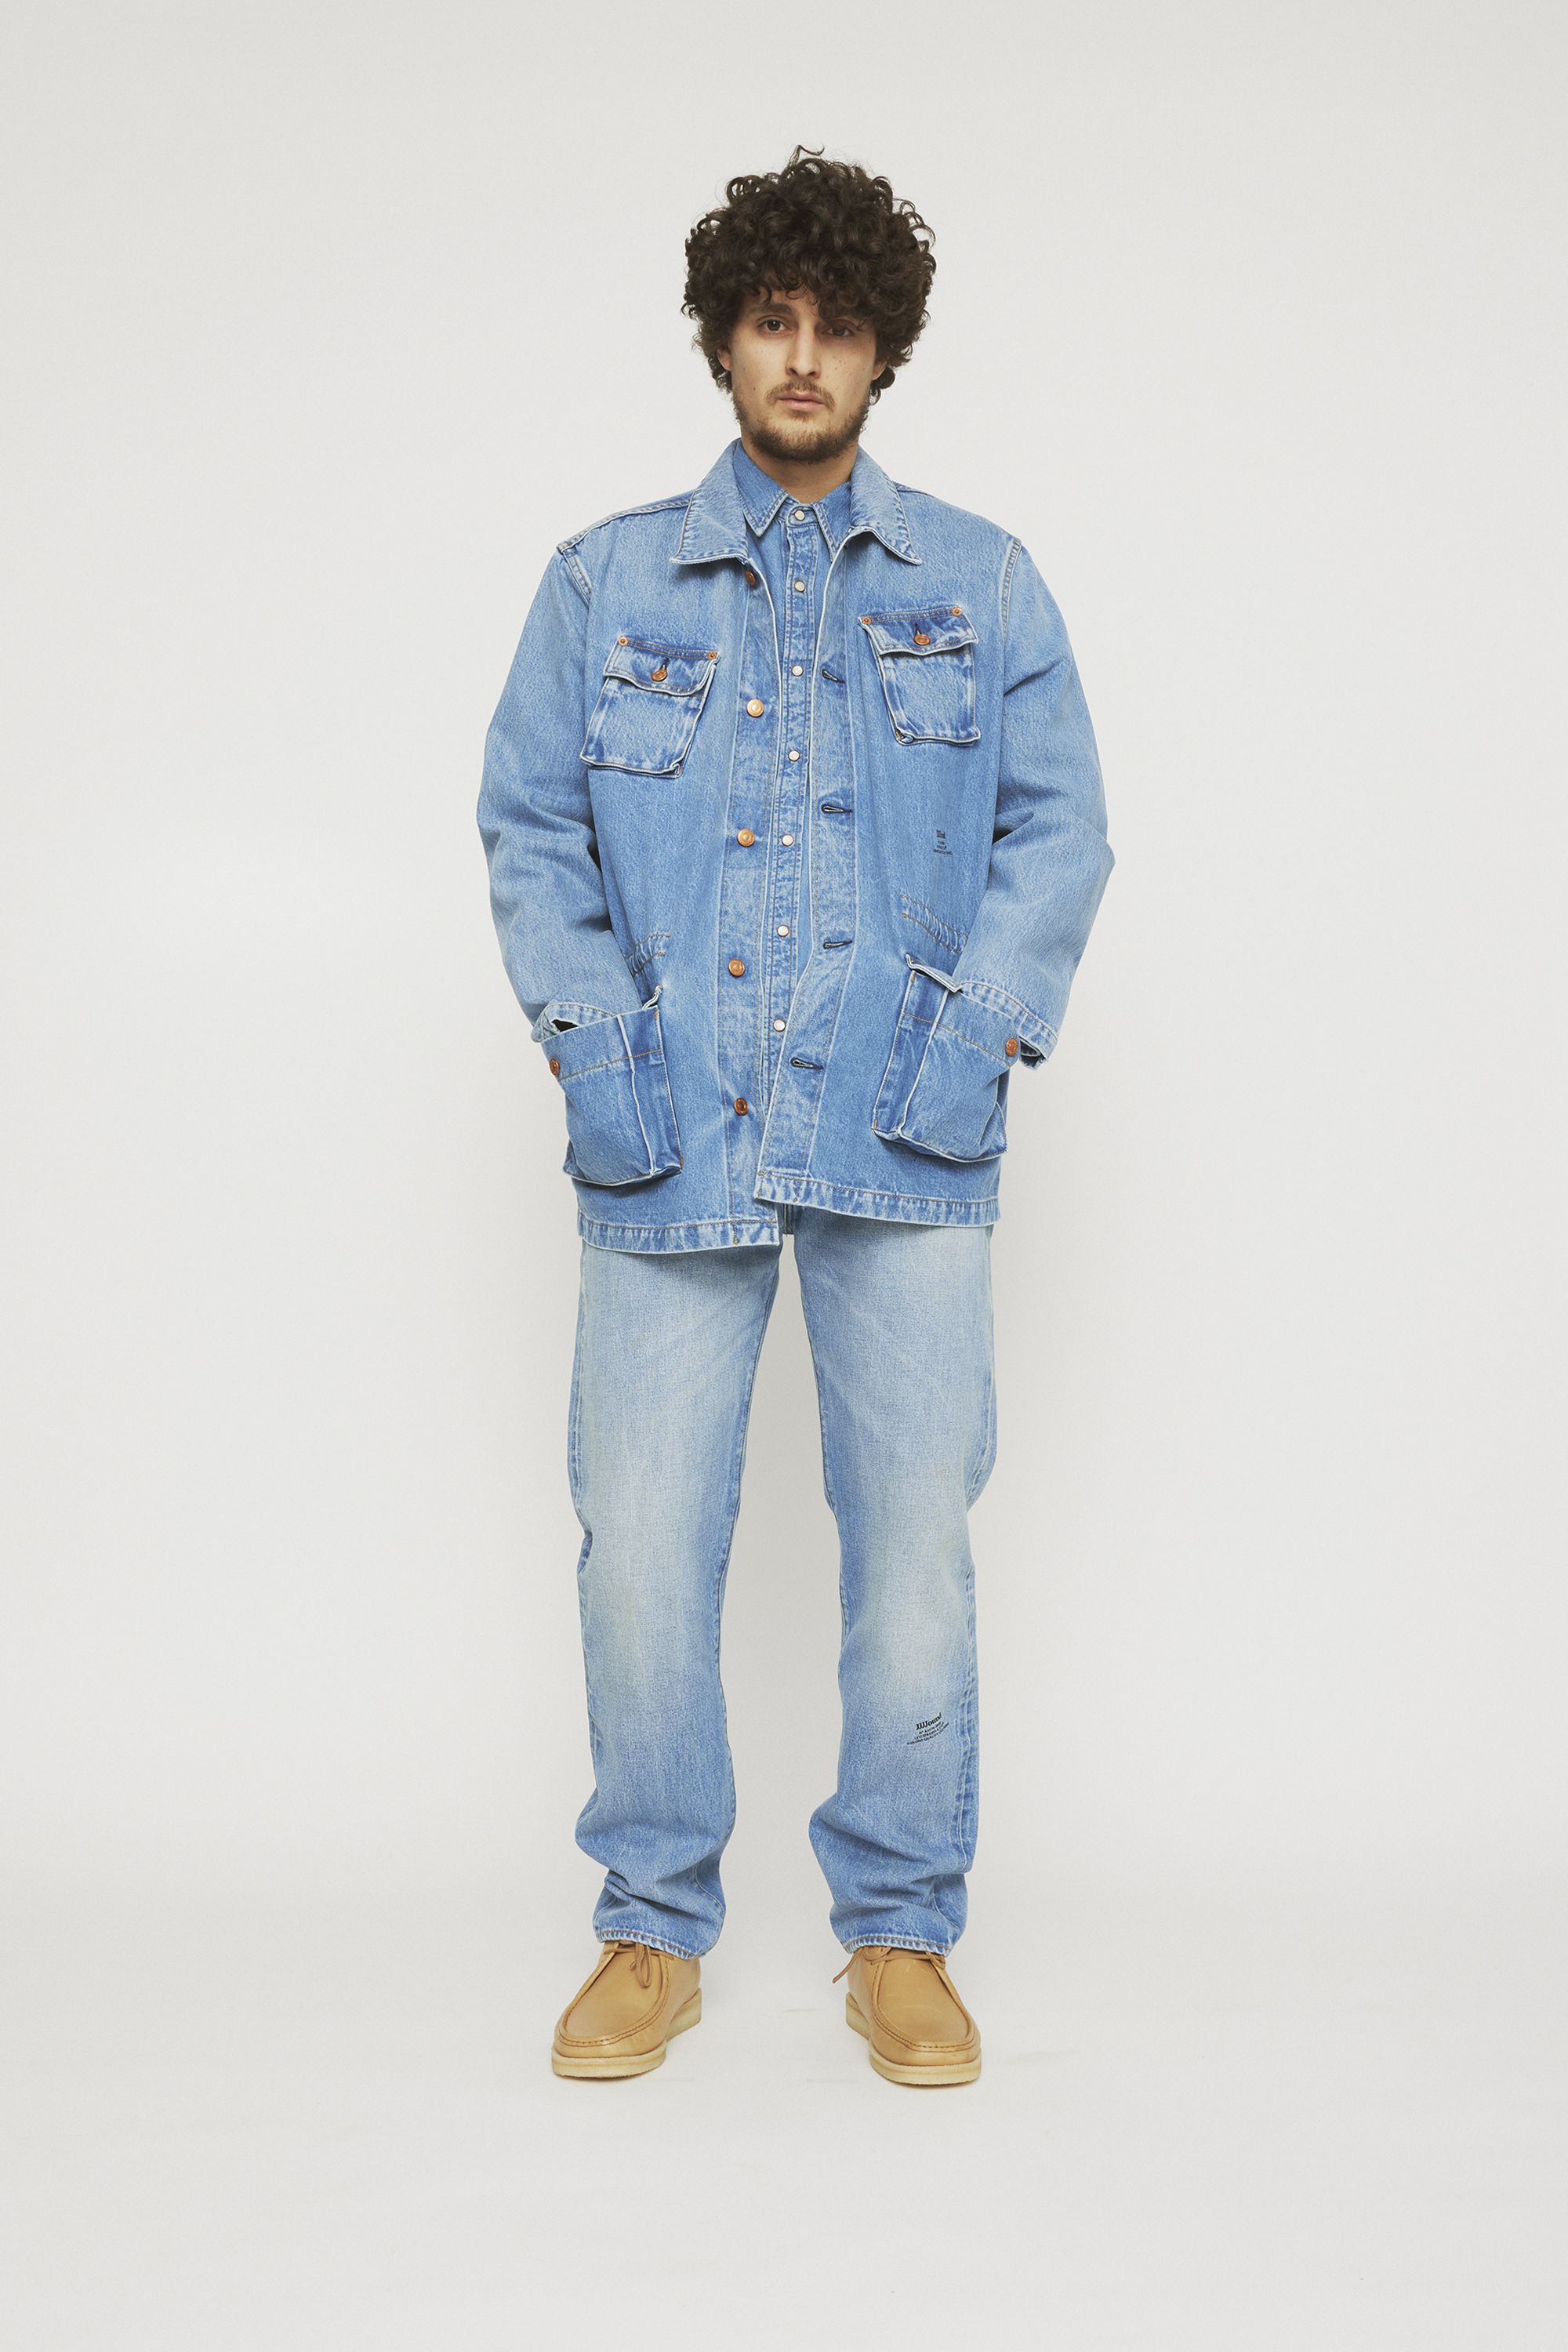 The complete JJJJound and Levi's® collection - HIGHXTAR.